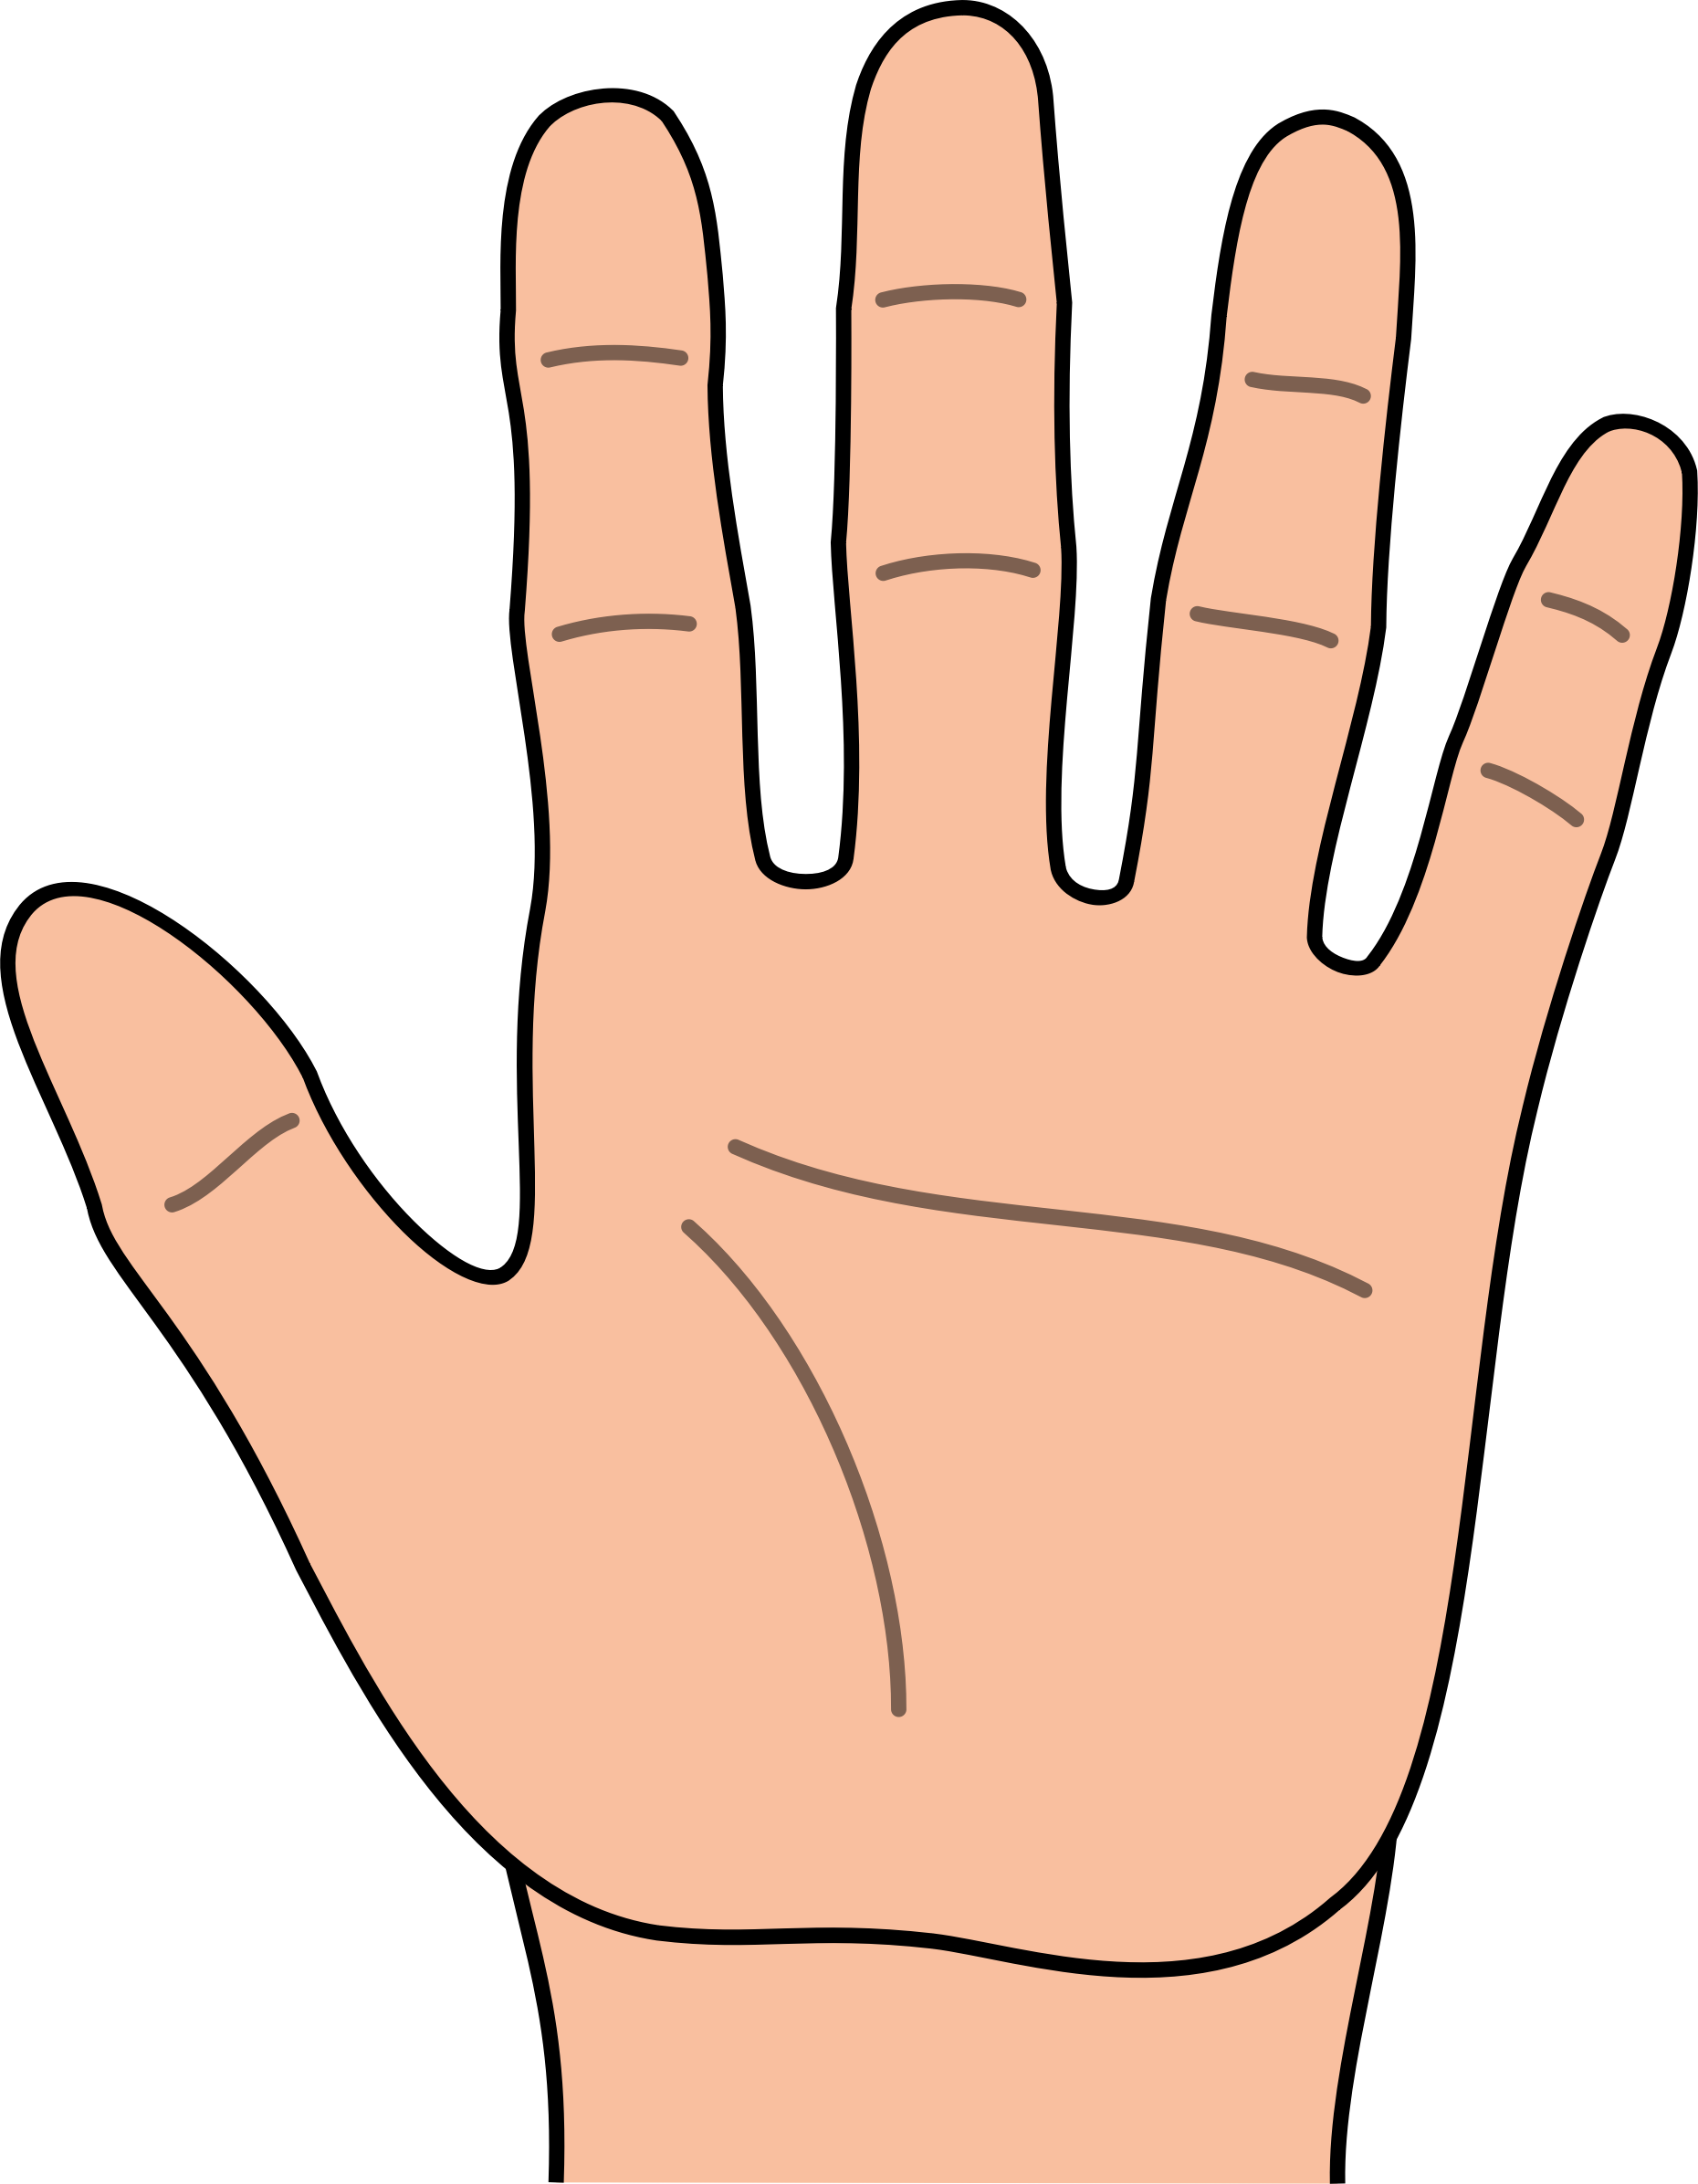 Hands hand clip art free clipart images